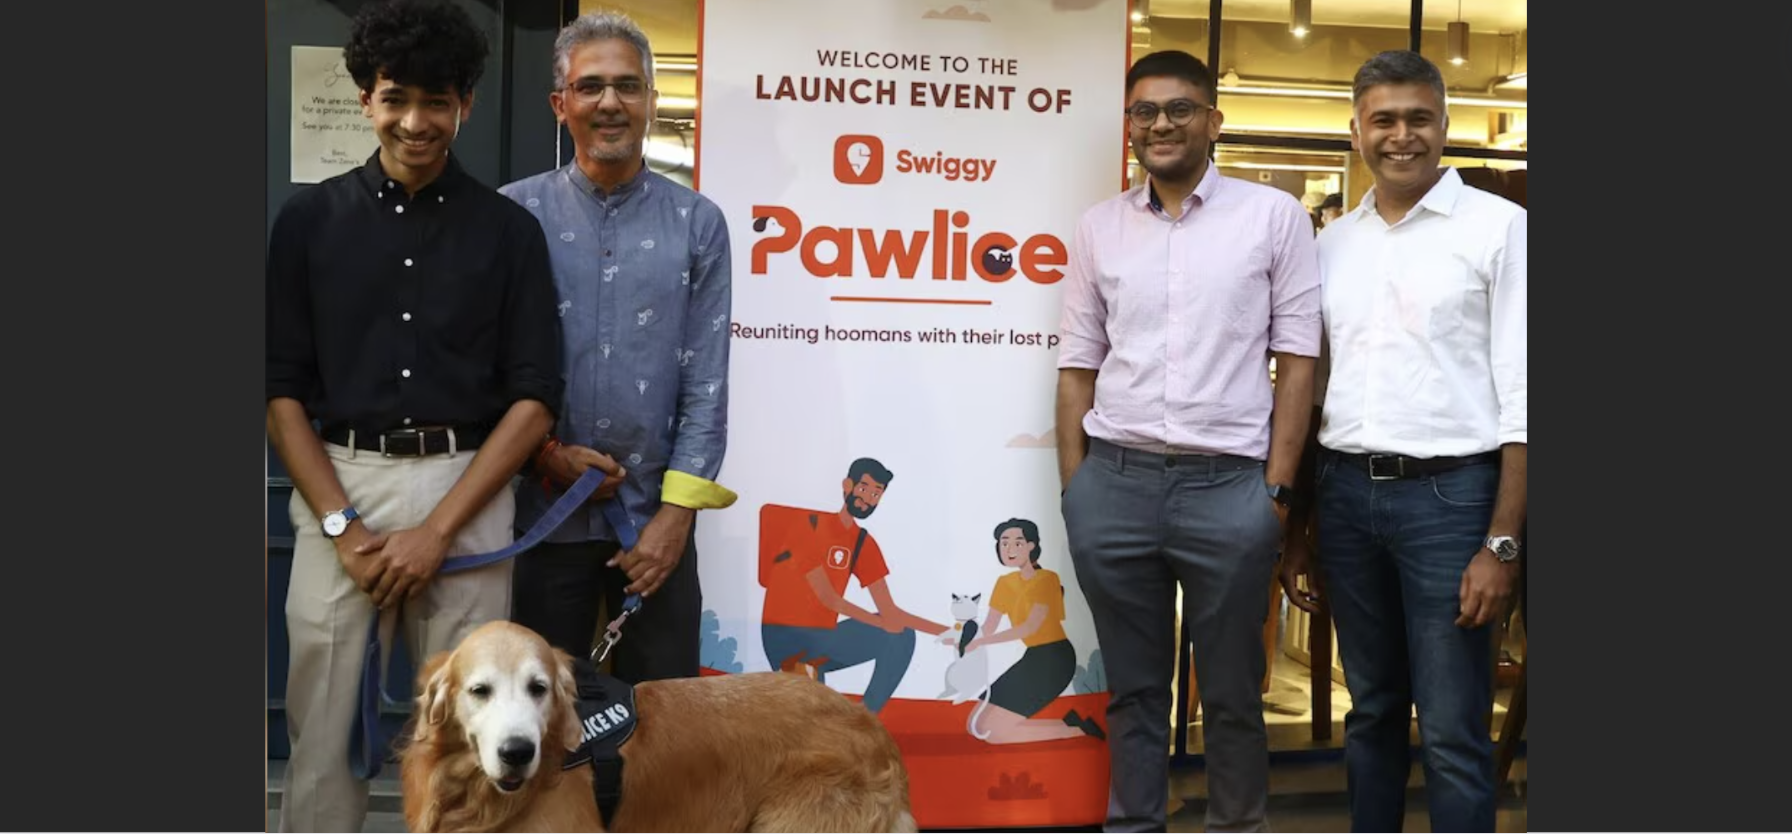 Find Your Missing Pet On Swiggy With Swiggy Pawlice Service